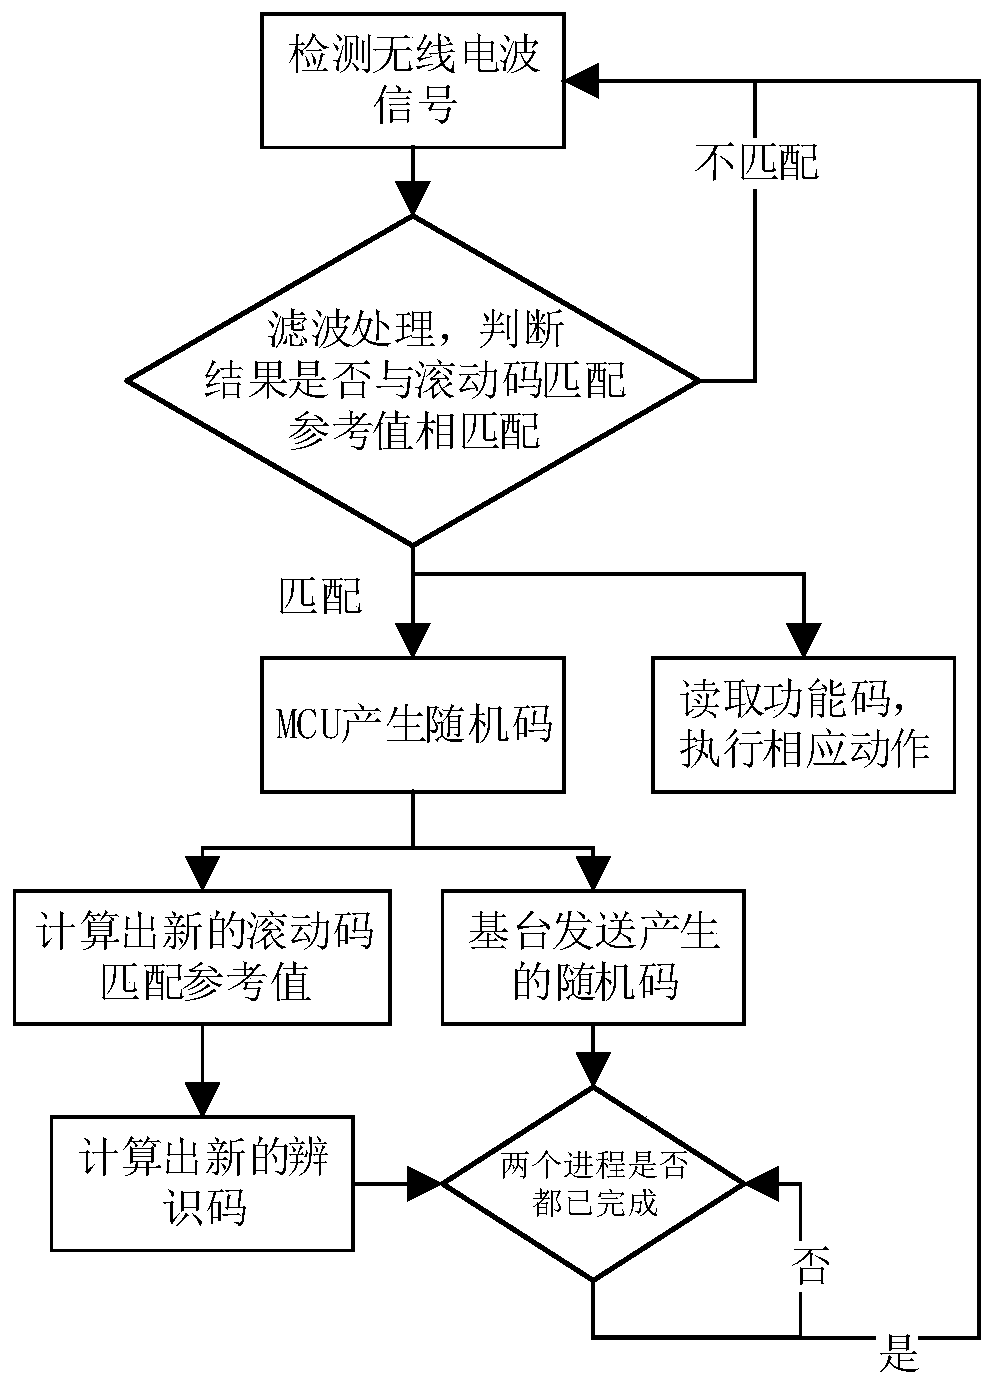 A car remote control radio frequency encryption matching method with high anti-theft performance